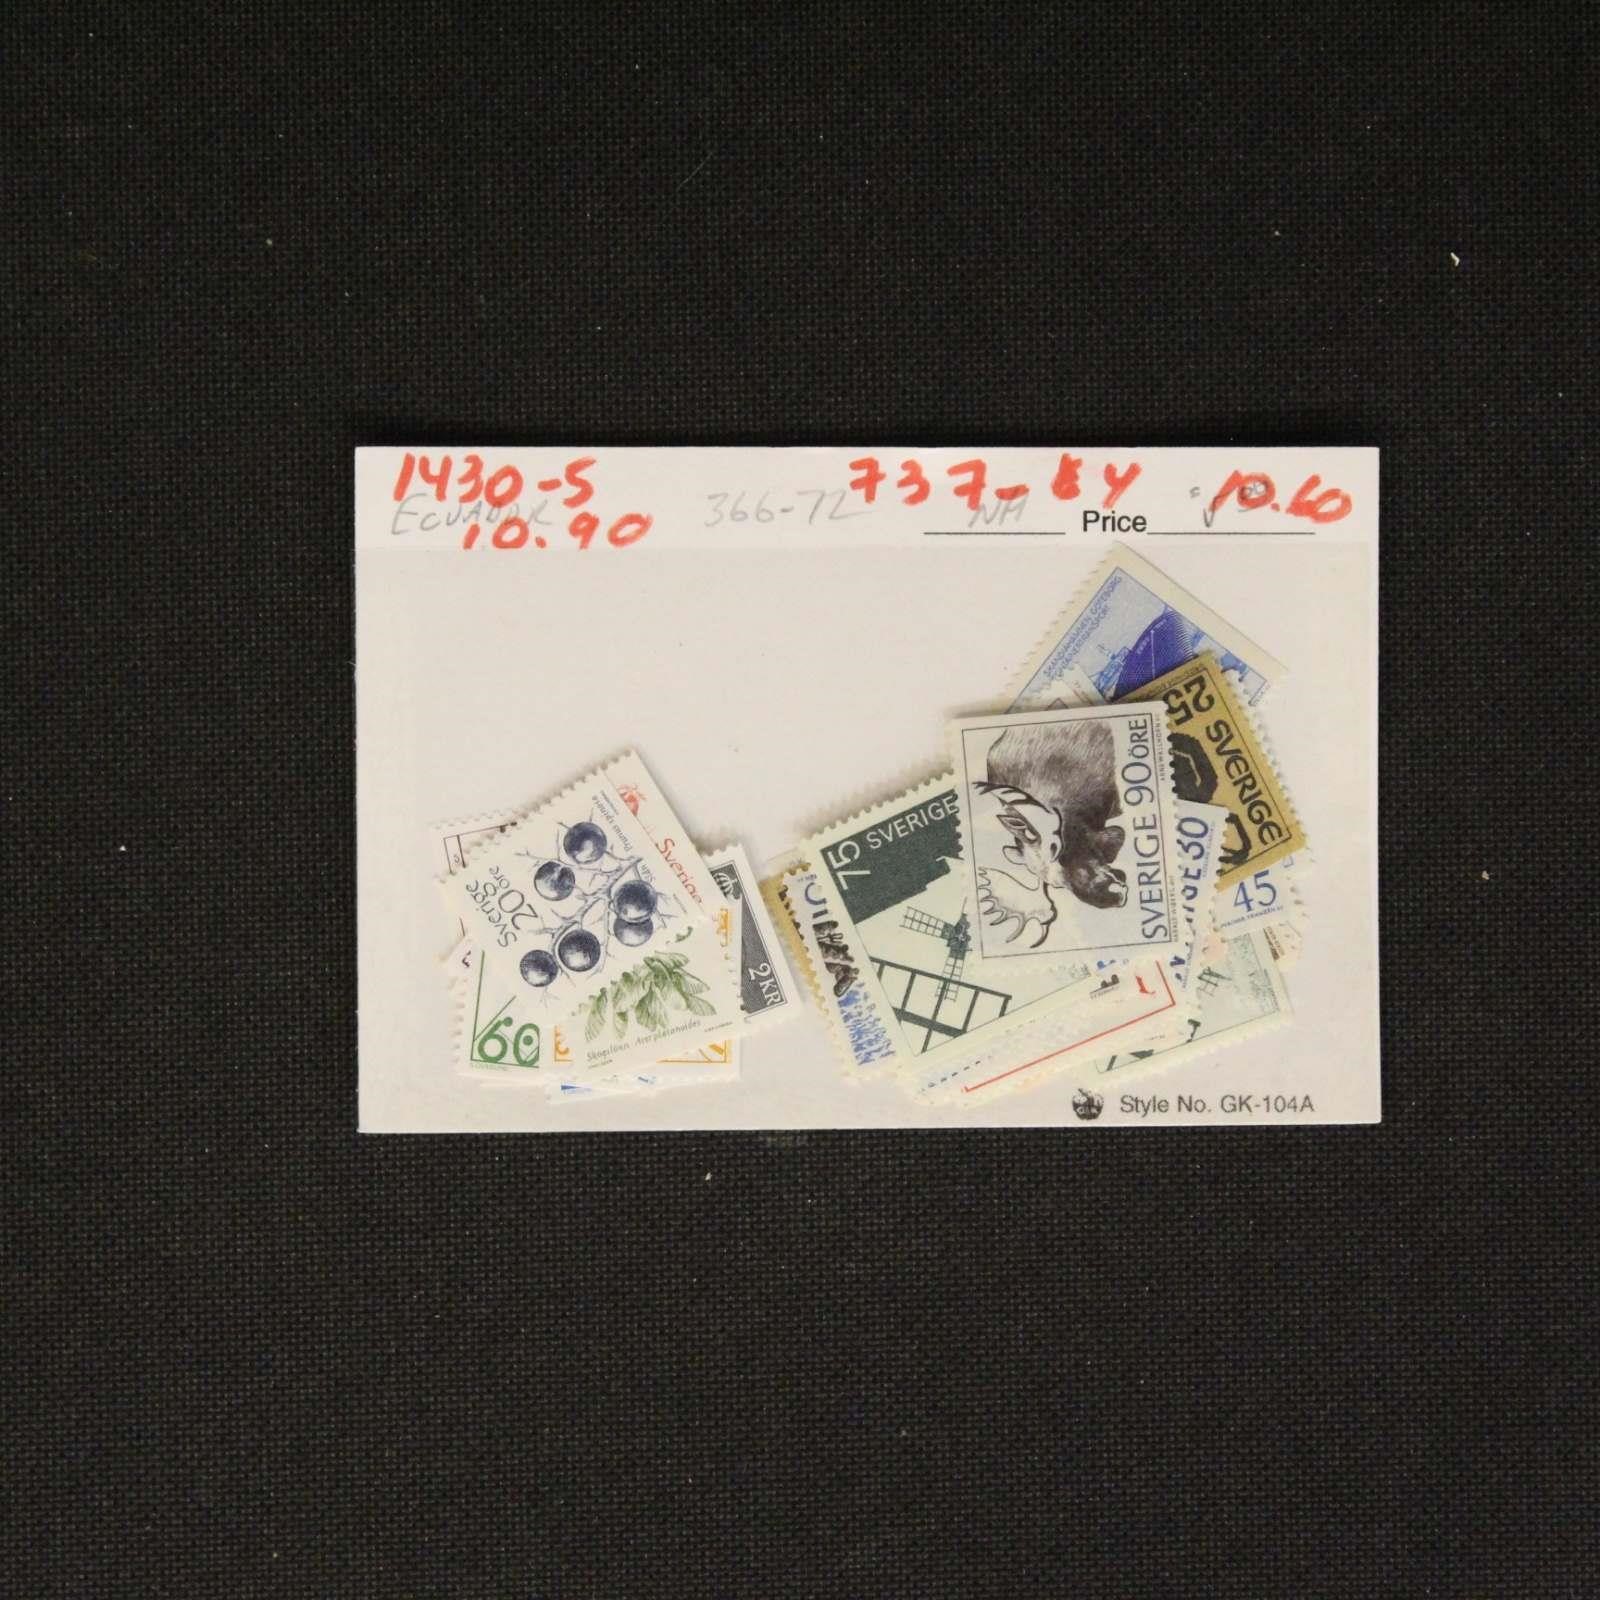 October 13th, 2019 Weekly Stamps & Collectibles Auction